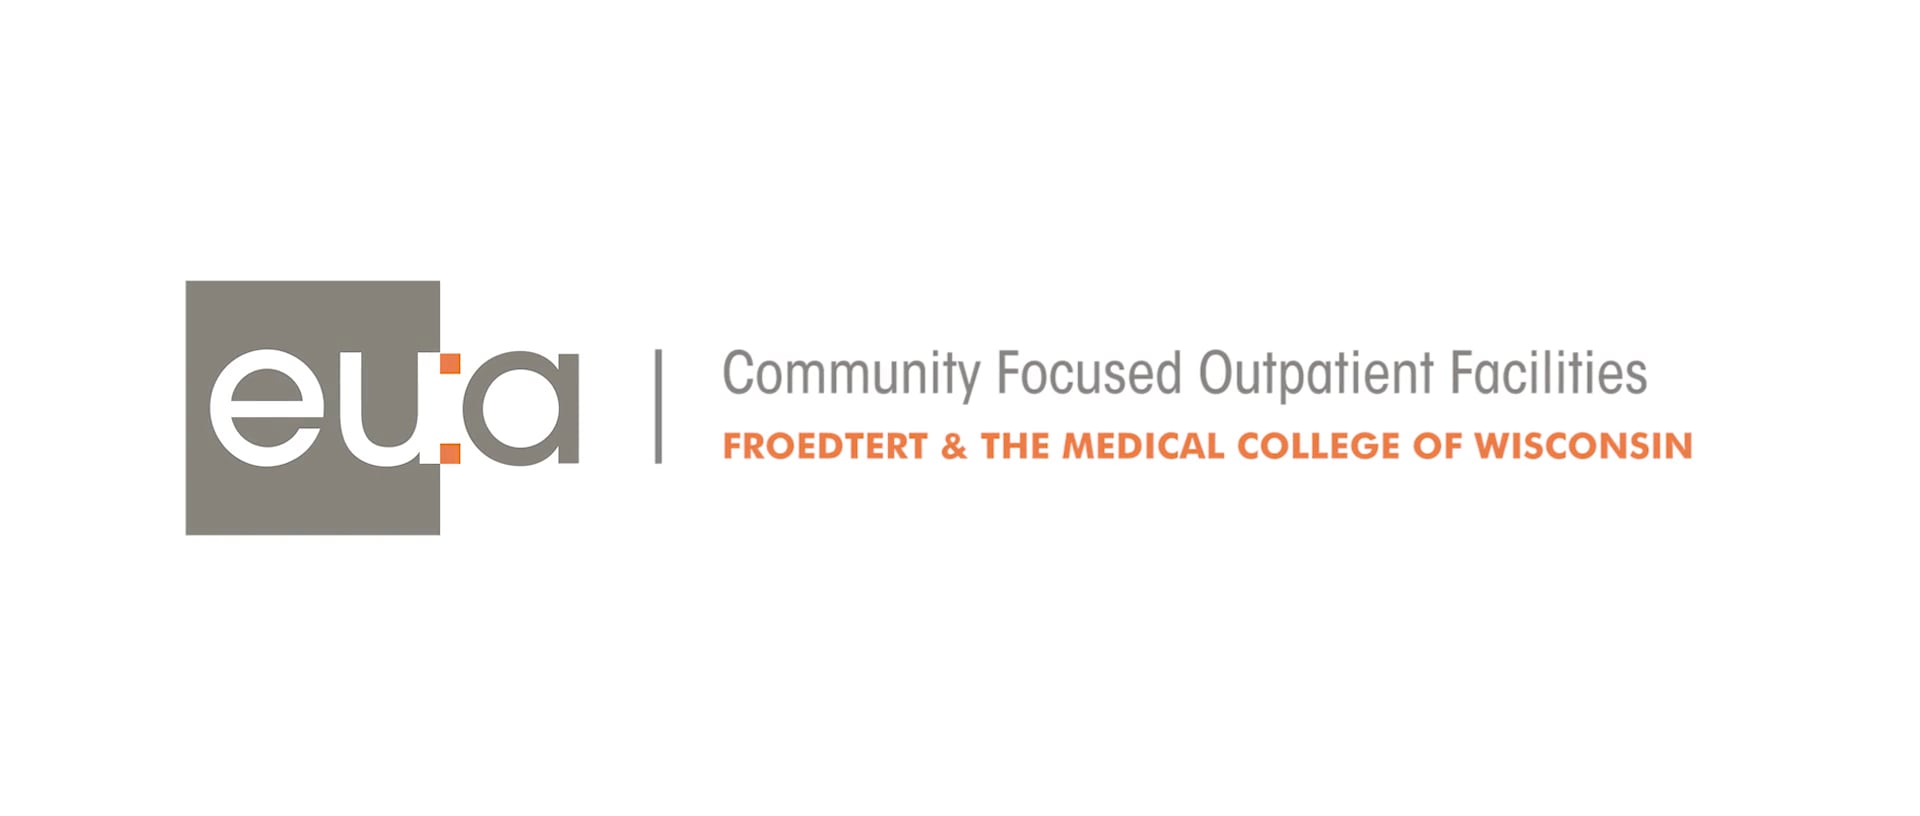 >Froedtert & The Medical College of Wisconsin | Community Focused Outpatient Facilities